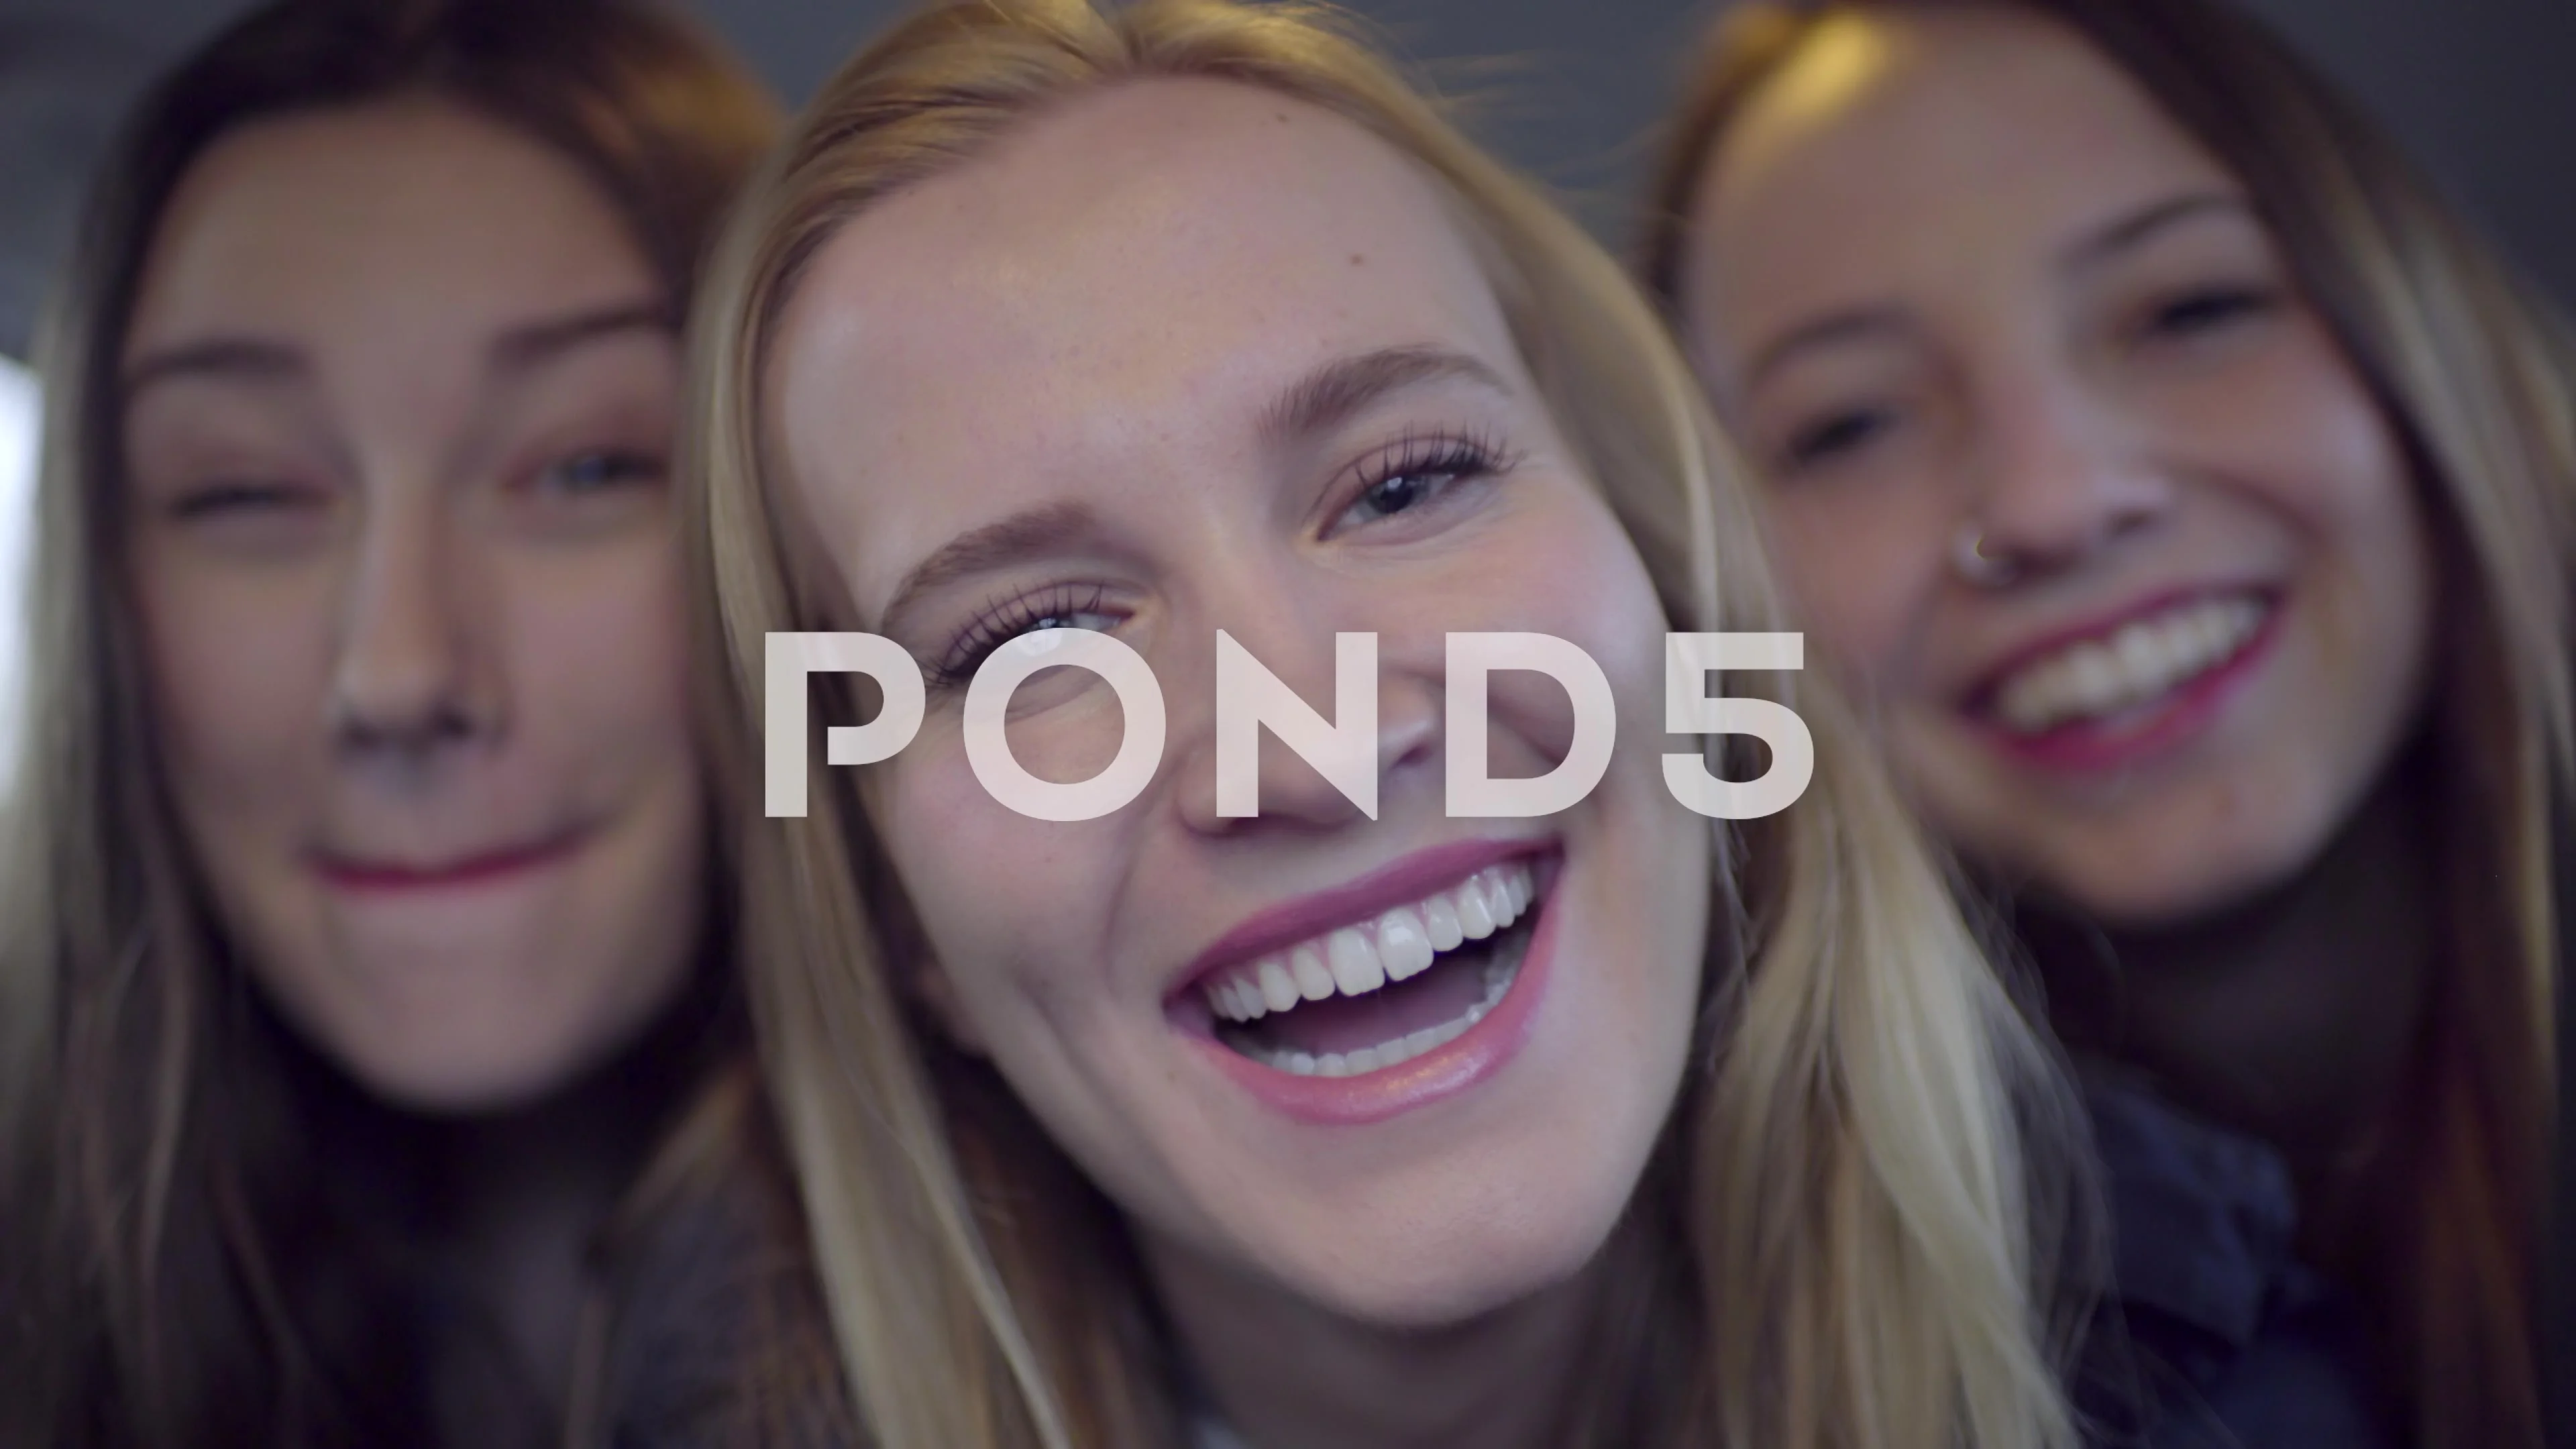 Best Friends Pose For Fun Selfies In Bac... | Stock Video | Pond5